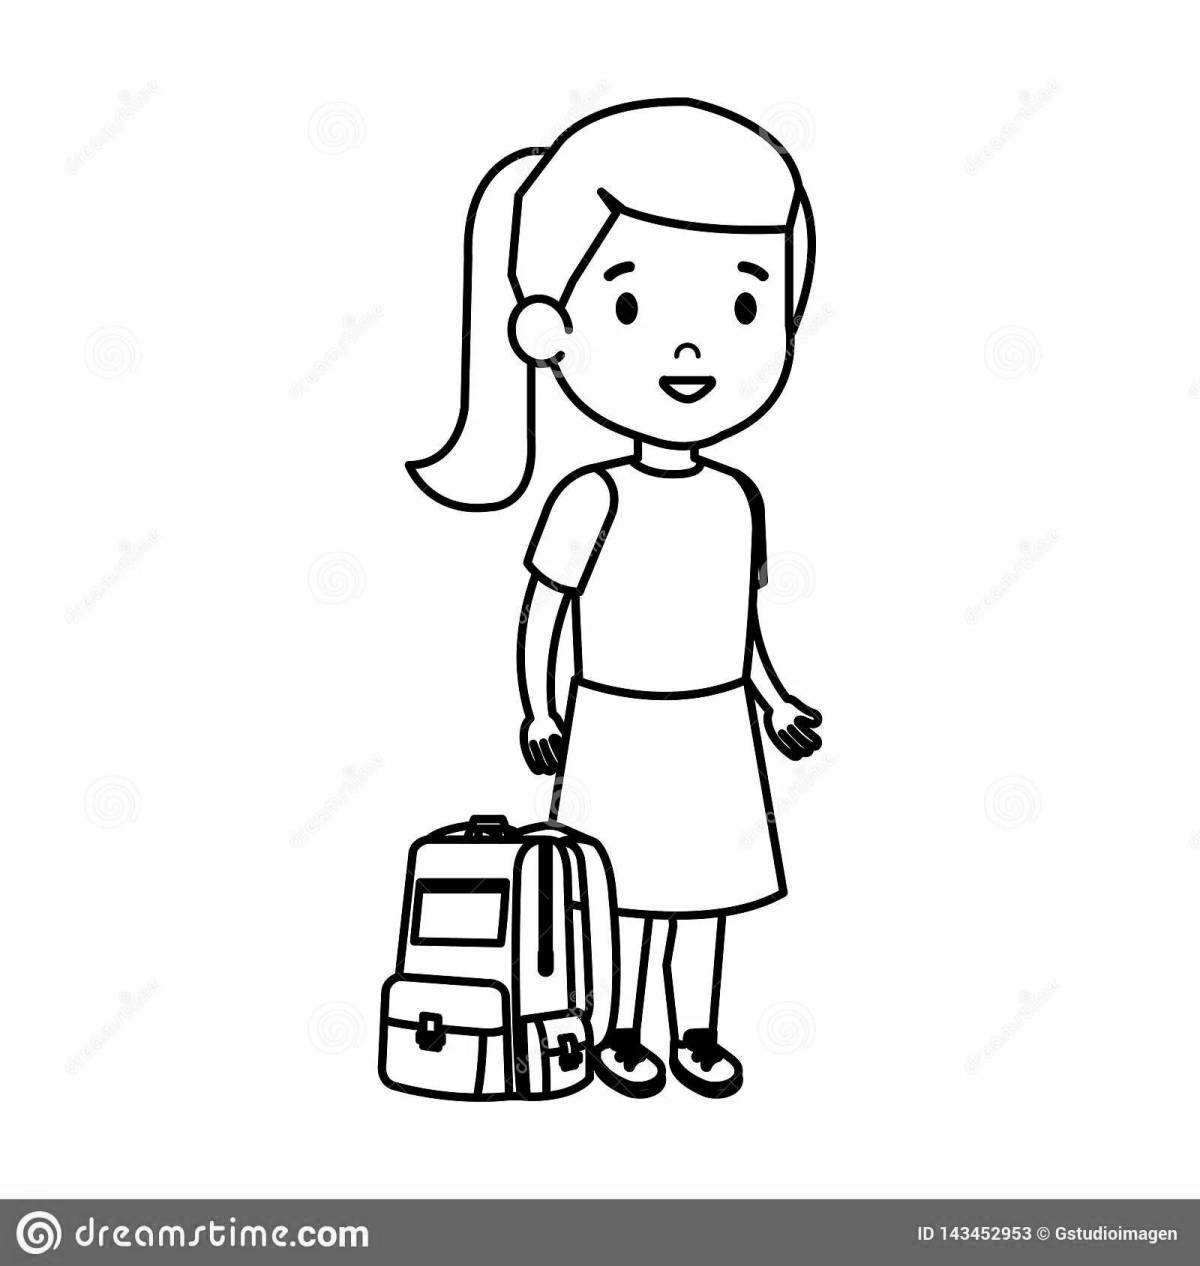 Coloring page of outgoing schoolgirl